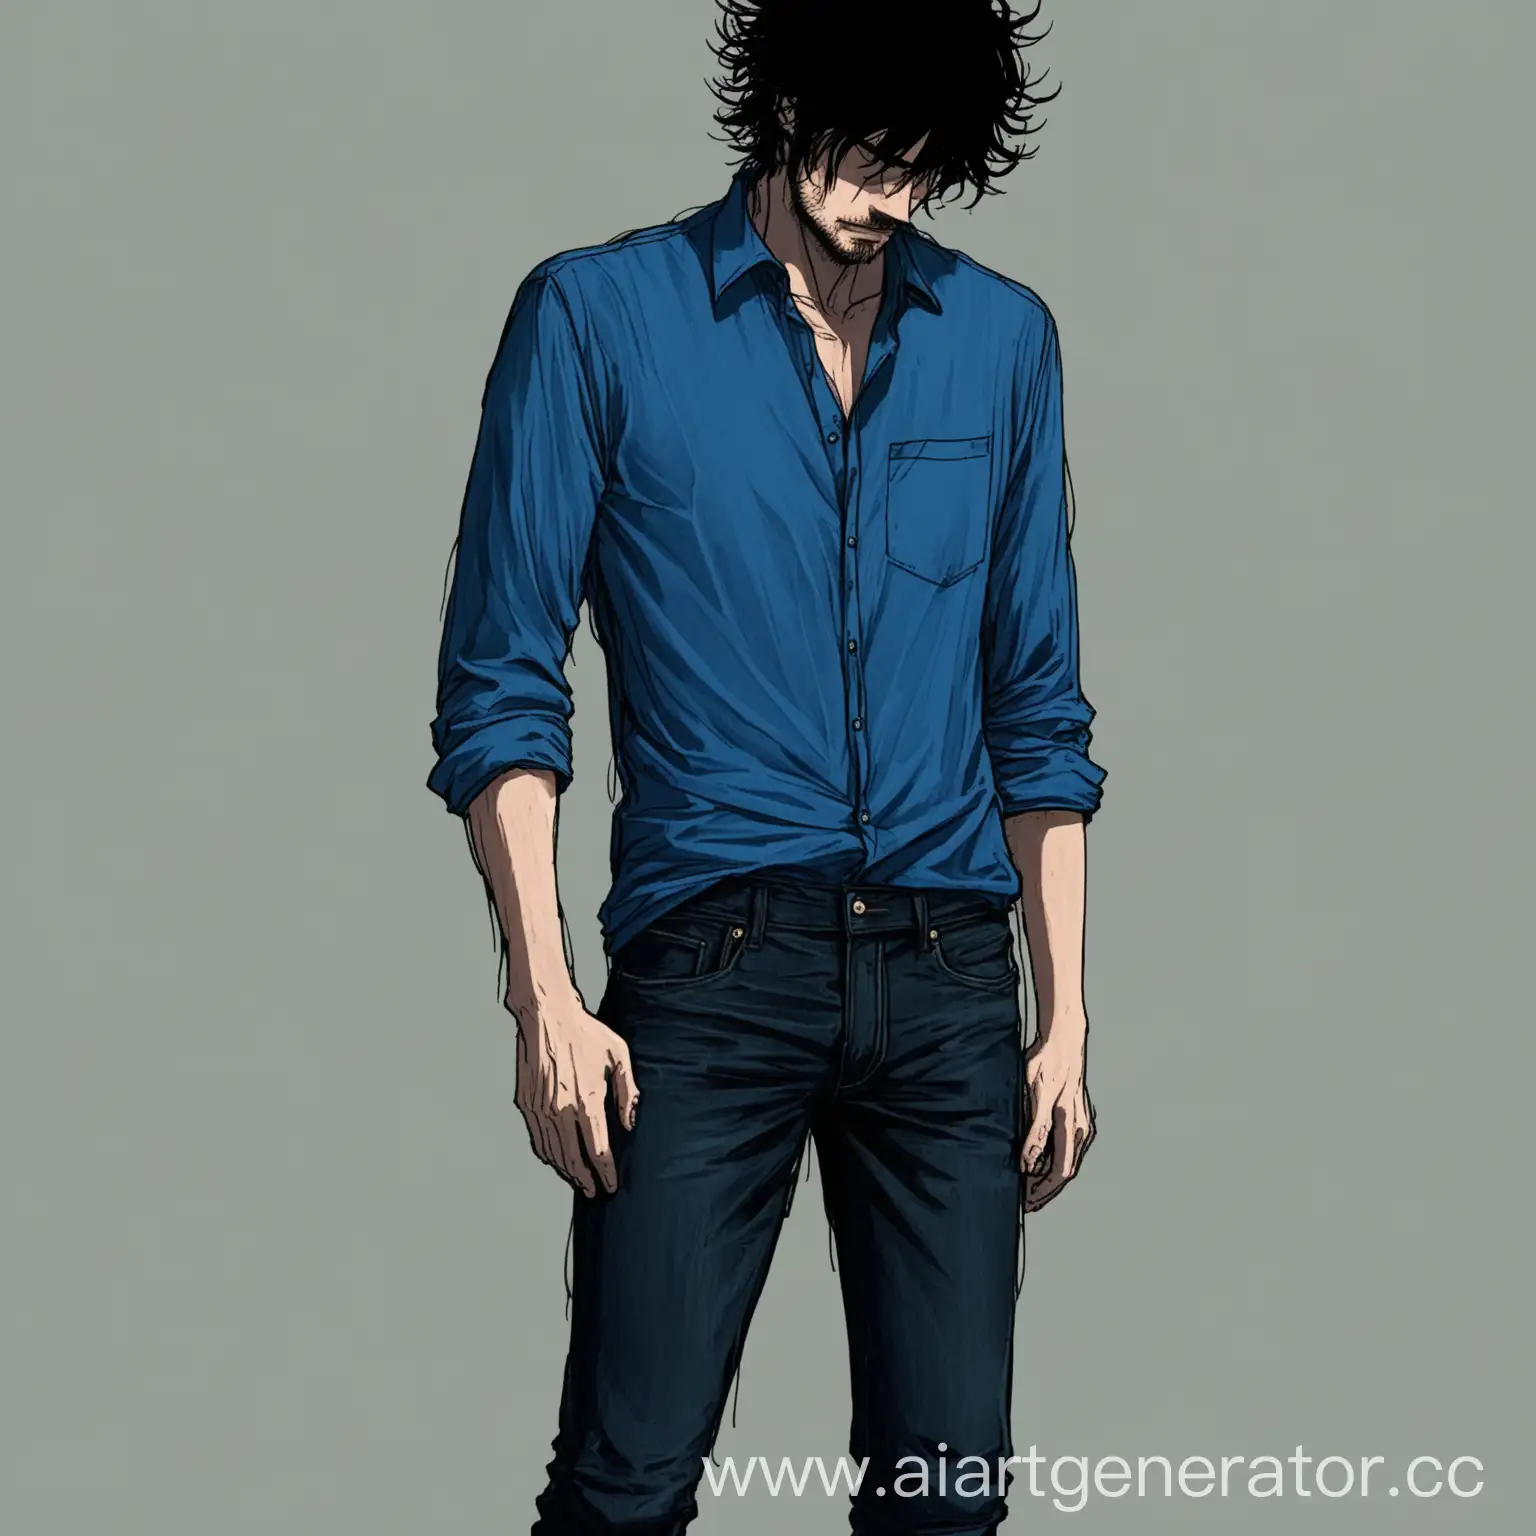 Masculine-Figure-in-Blue-Shirt-and-Dark-Jeans-with-Black-Messy-Hair